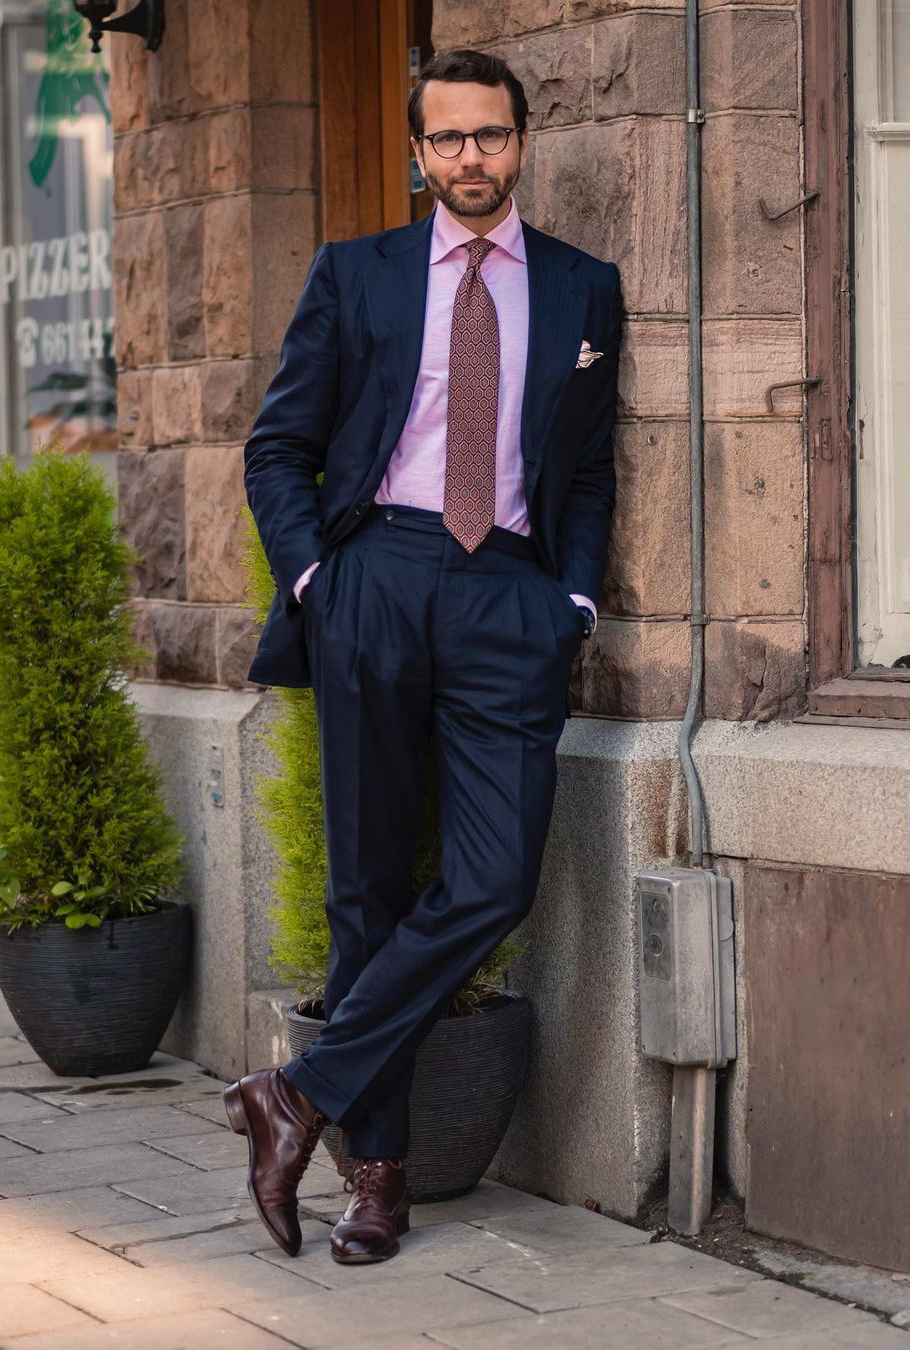 Navy suit, pink shirt, and burgundy red paisley tie color combination